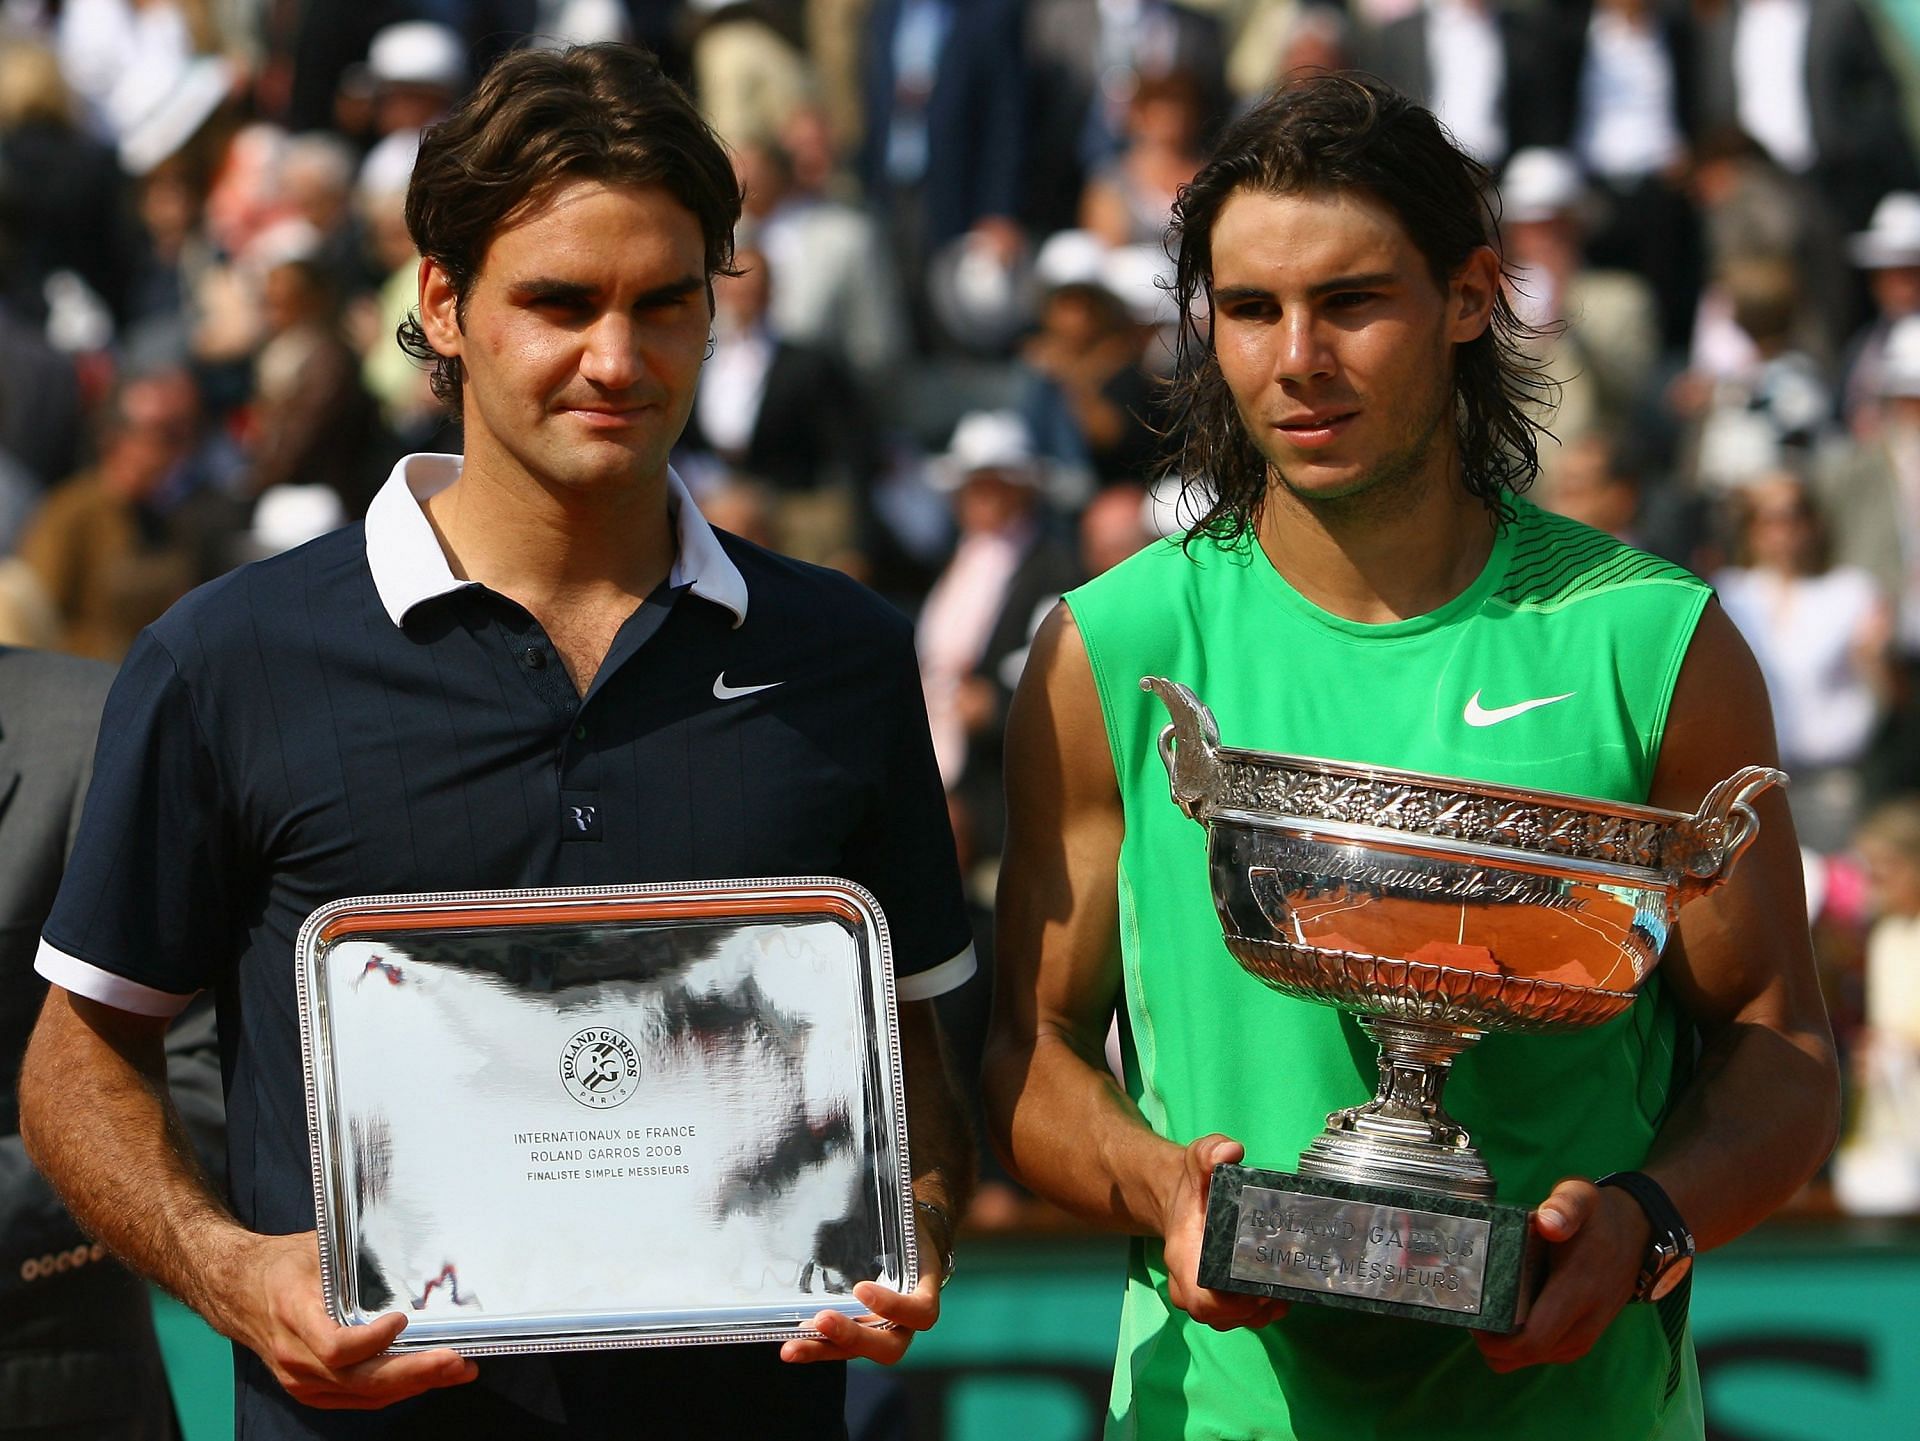 2008 French Open - Rafael Nadal and Roger Federer